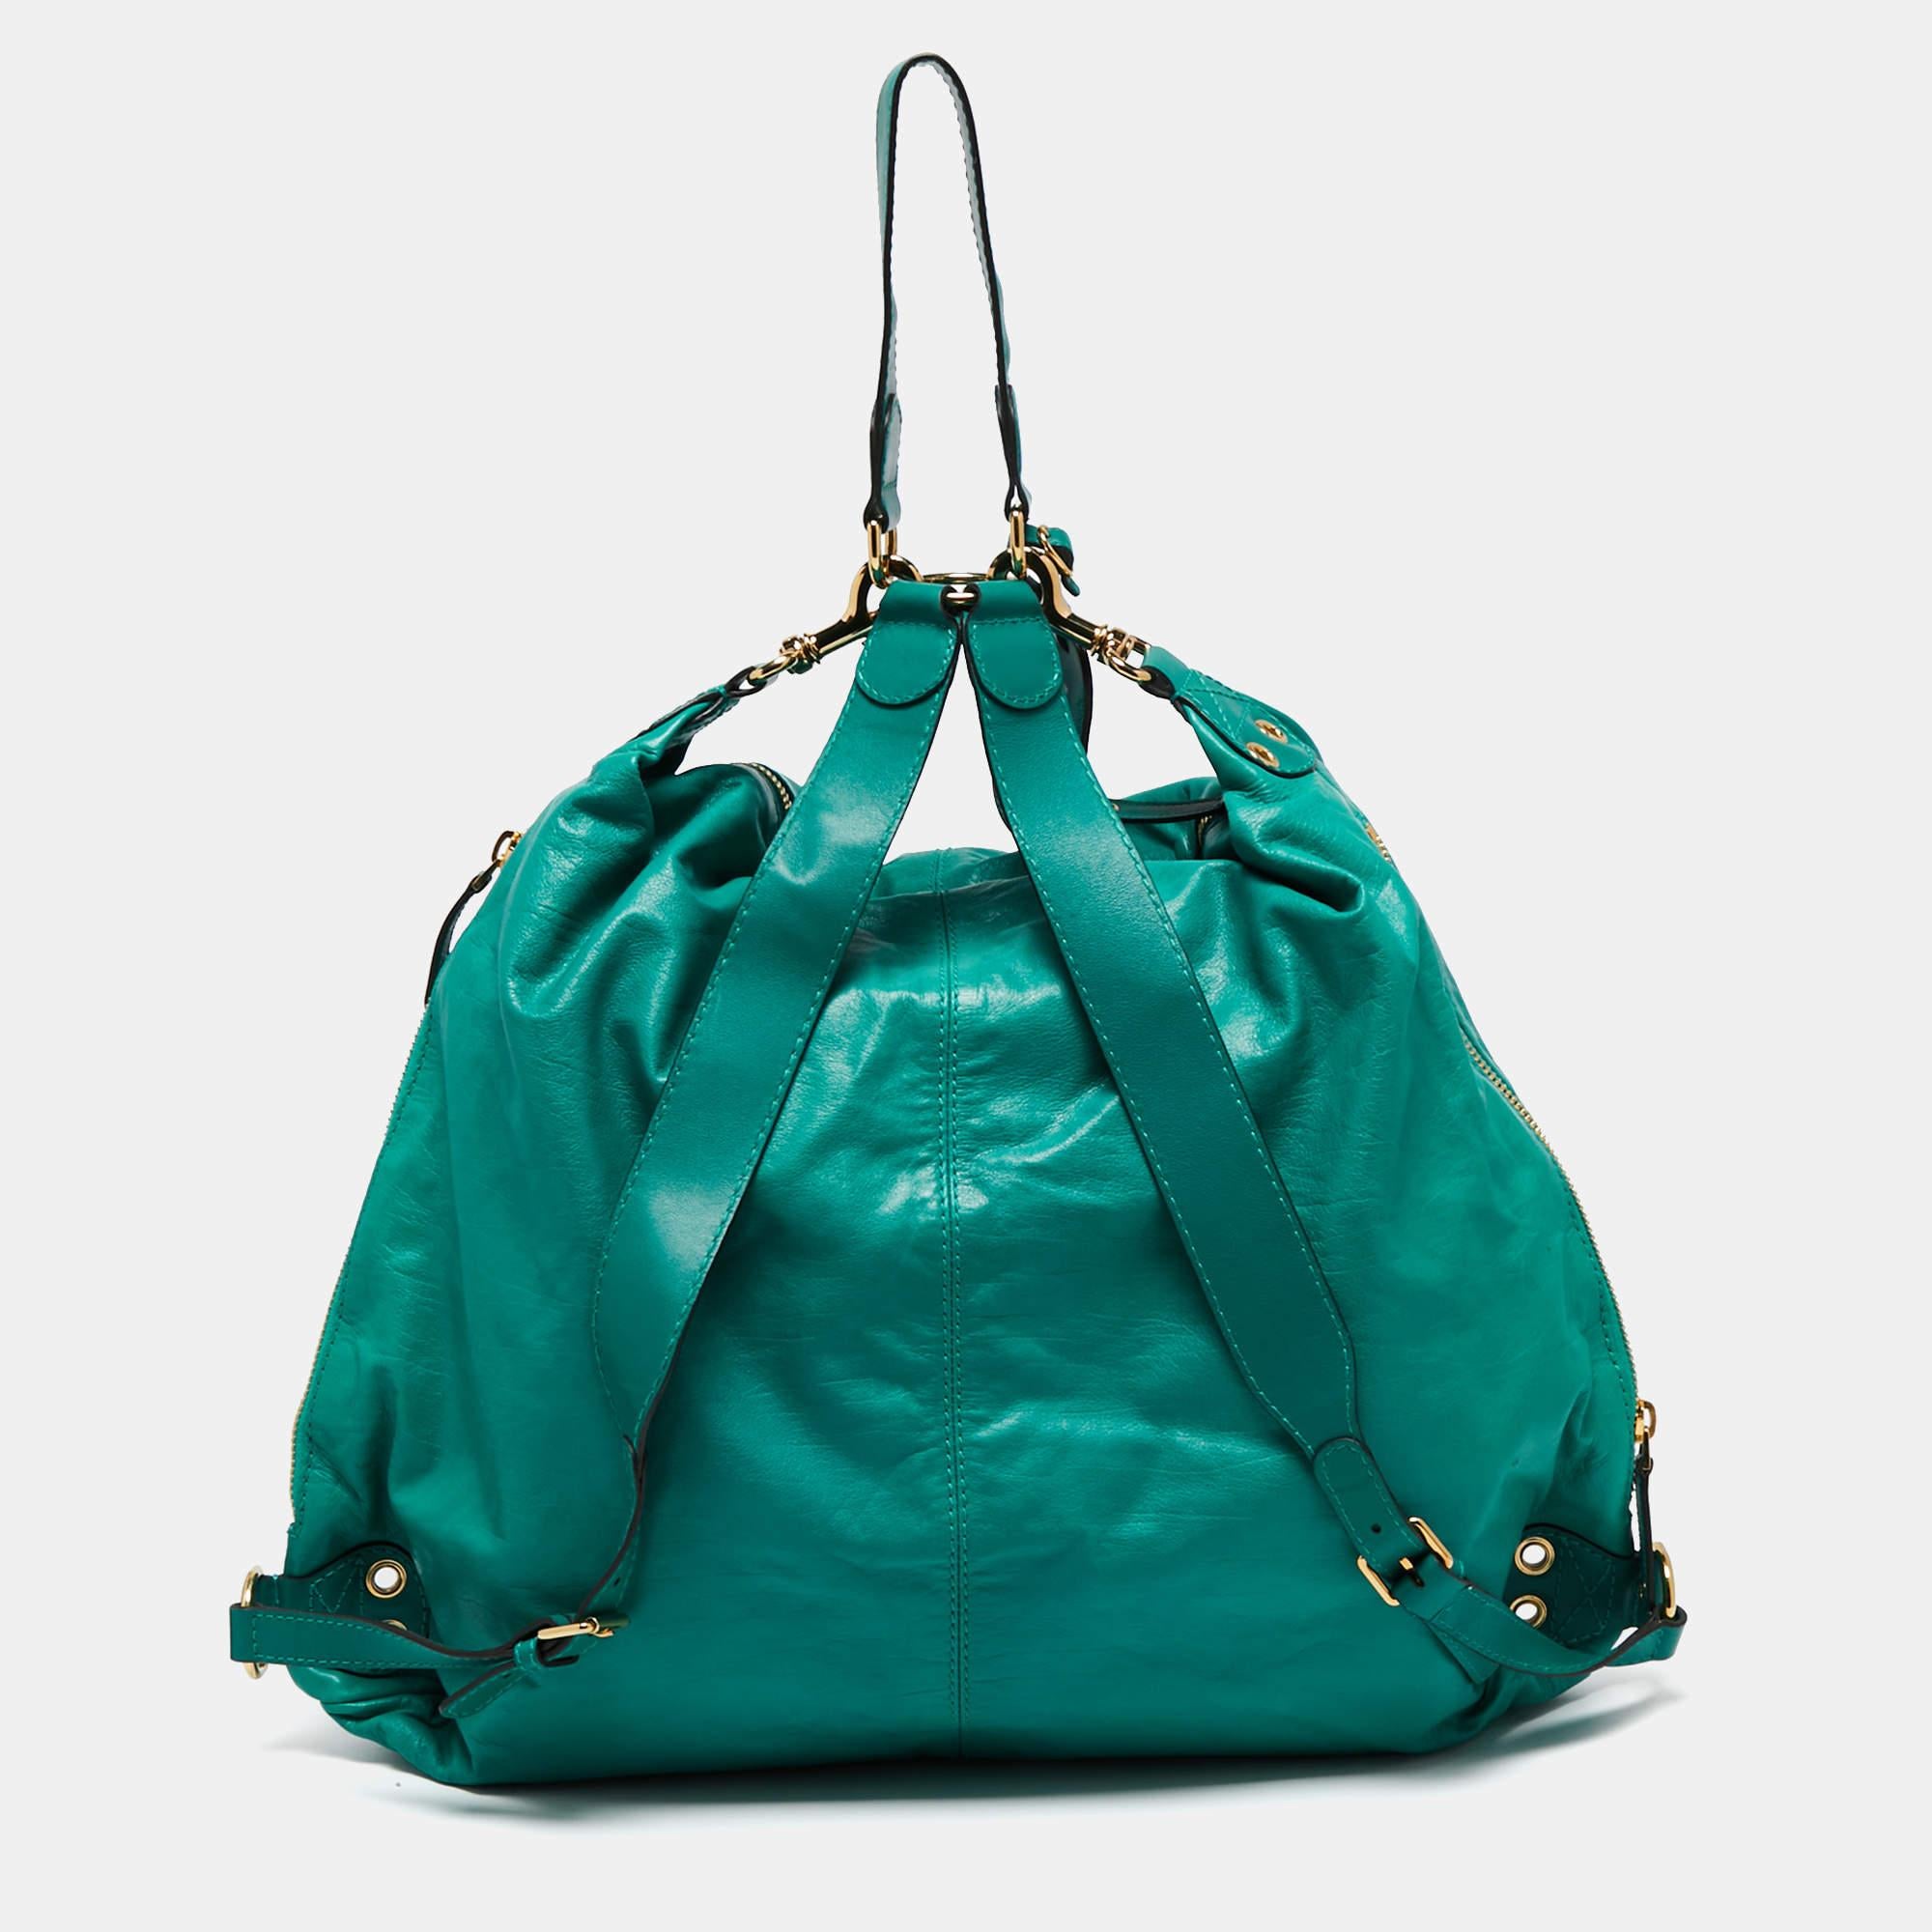 Add some elevation to your everyday attire with this super stylish backpack. The Gucci creation is made from green leather and is held by two shoulder straps and a top handle. It is equipped with a spacious interior and flaunts multiple zip pockets